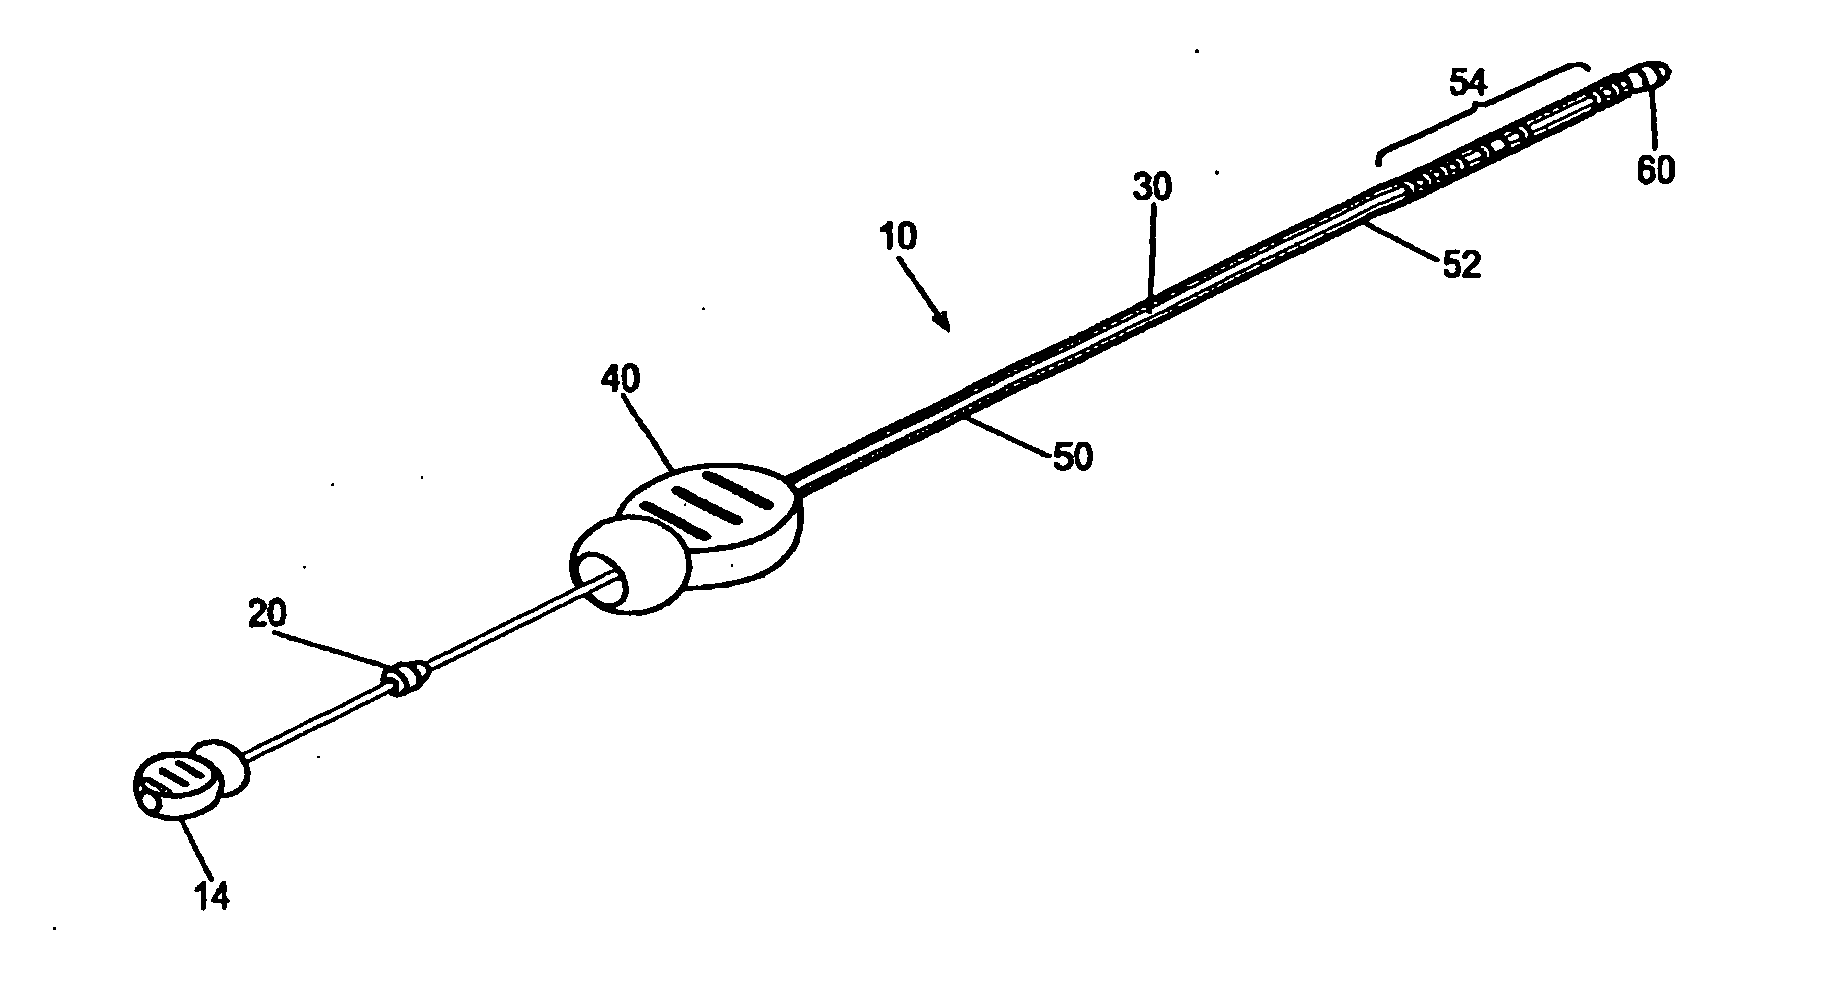 Medical appliance delivery apparatus and method of use